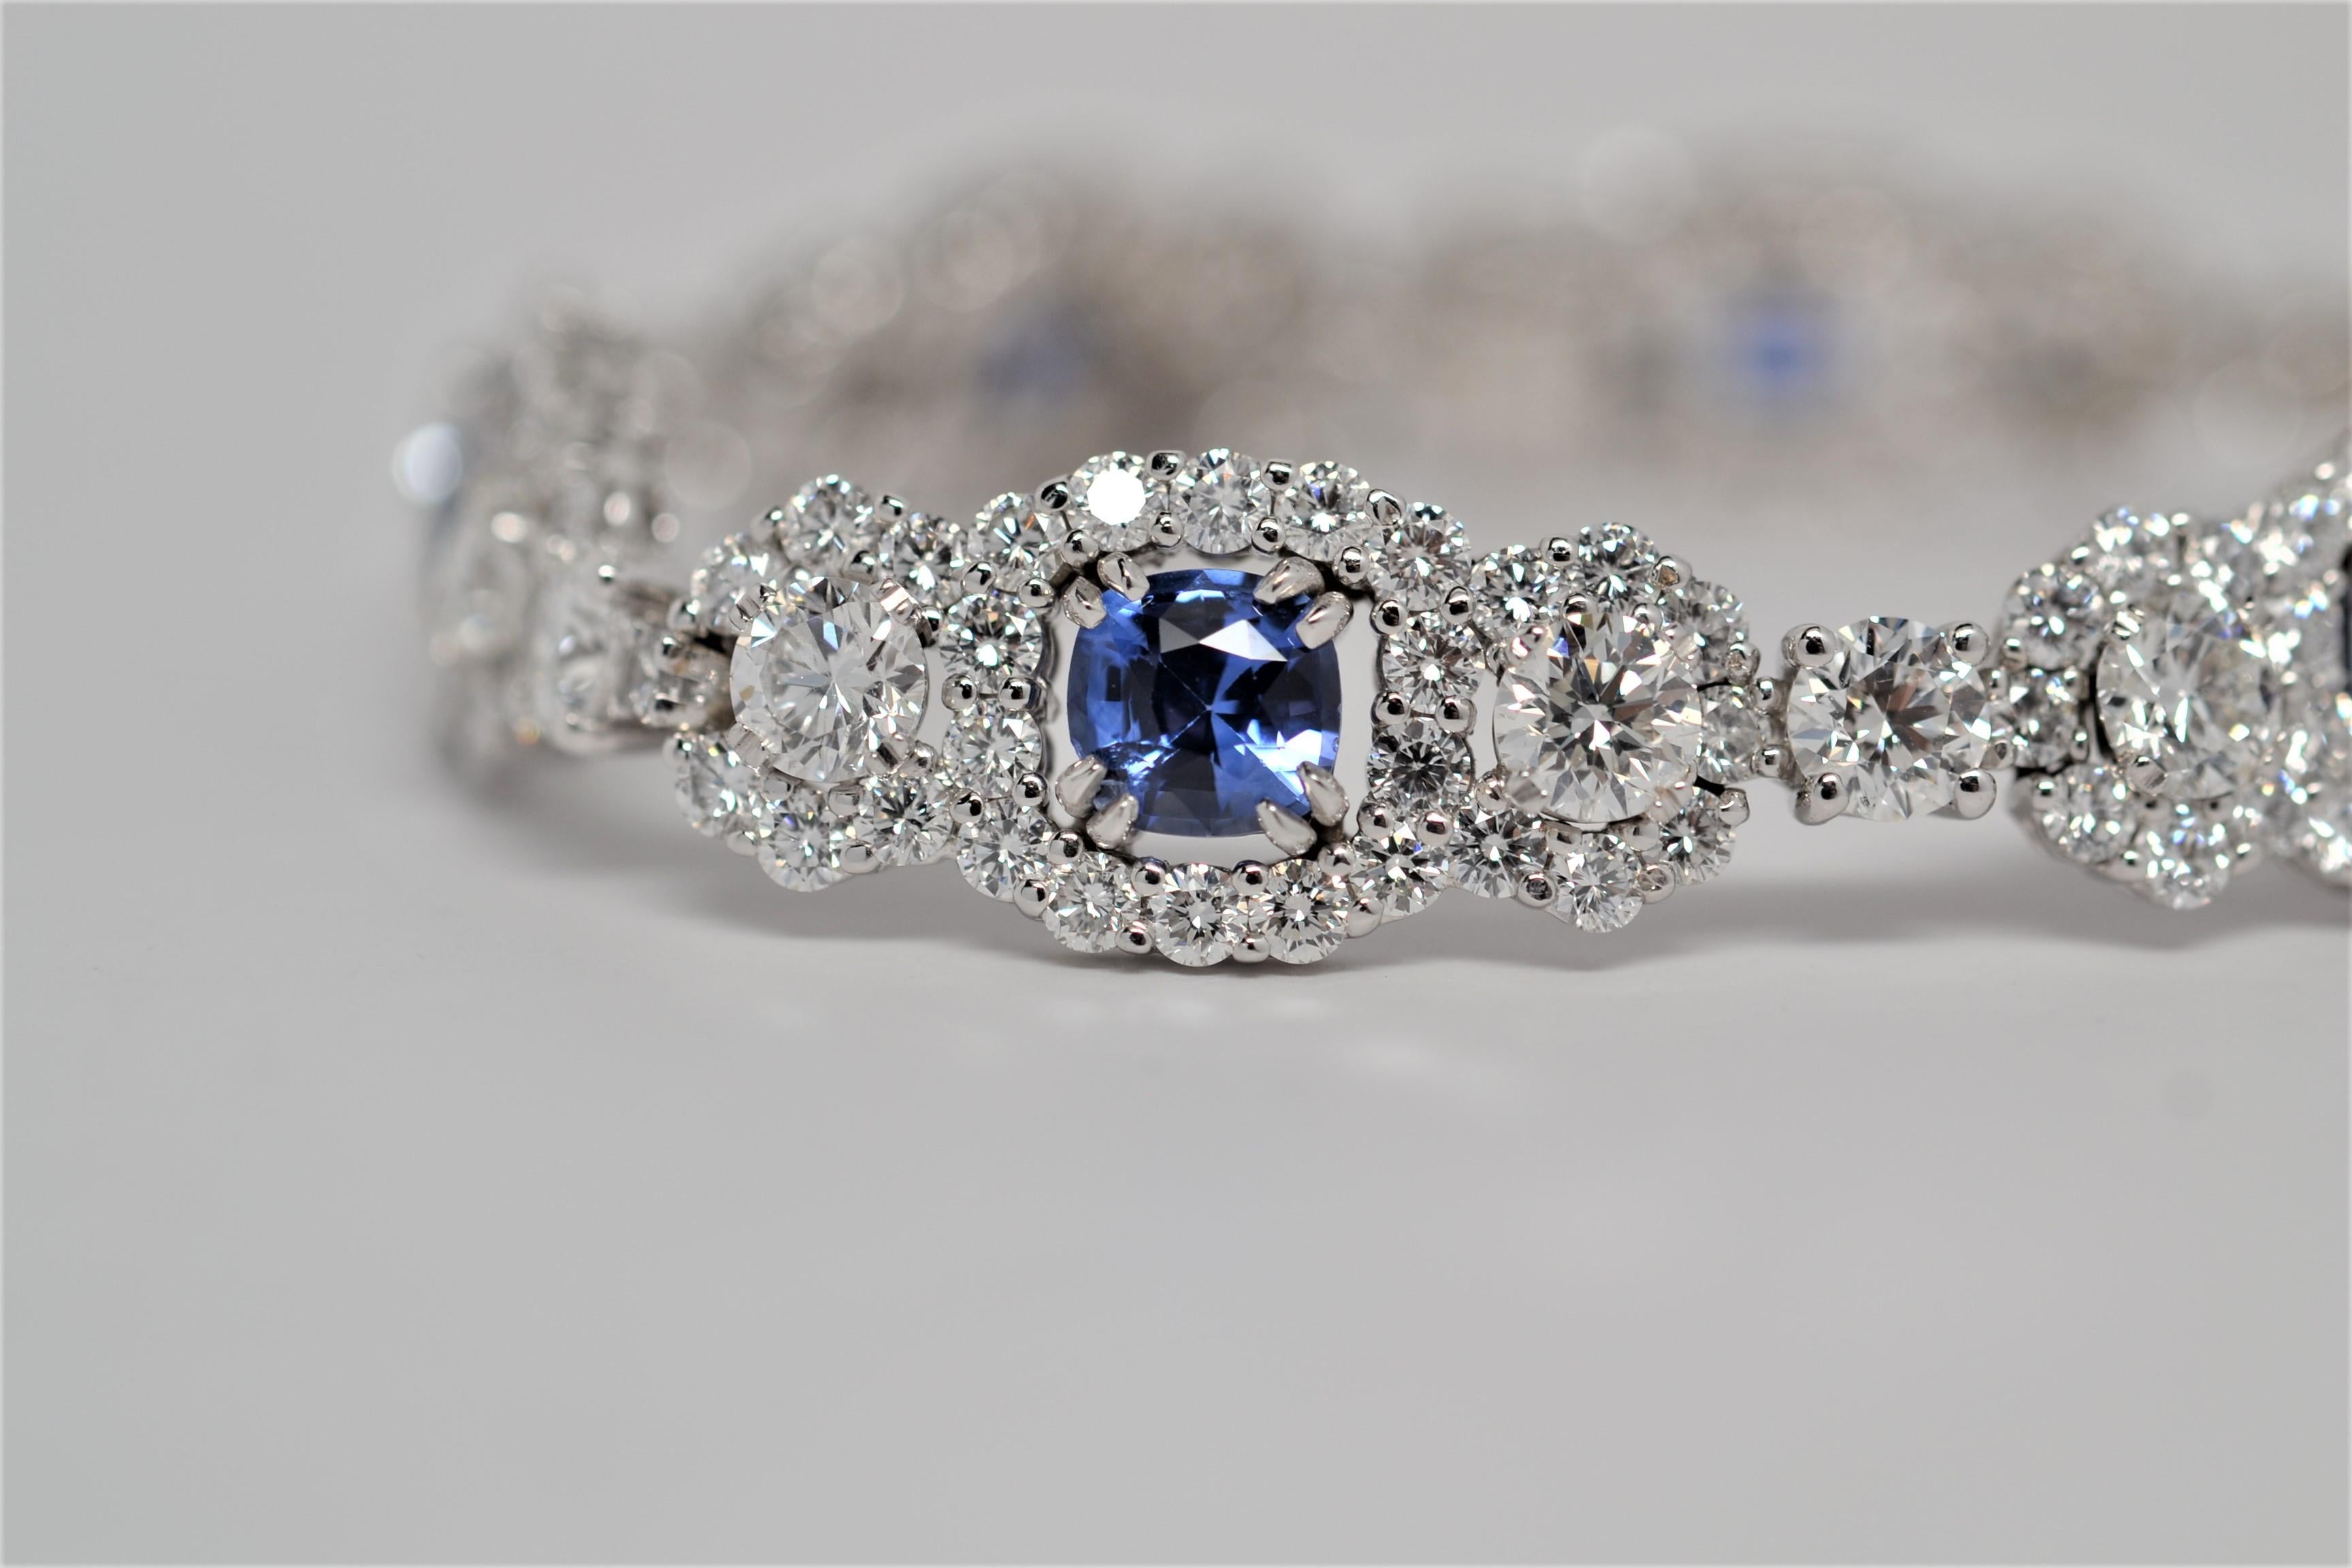 An elegant bracelet made in 18K White Gold and set with Round Brilliant Cut Blue Sapphires and Round Brilliant Cut Diamonds. 
Six Round Brilliant Cut Blue Sapphires are hand set with a double prong layout in a floating basket. The Sapphires are also